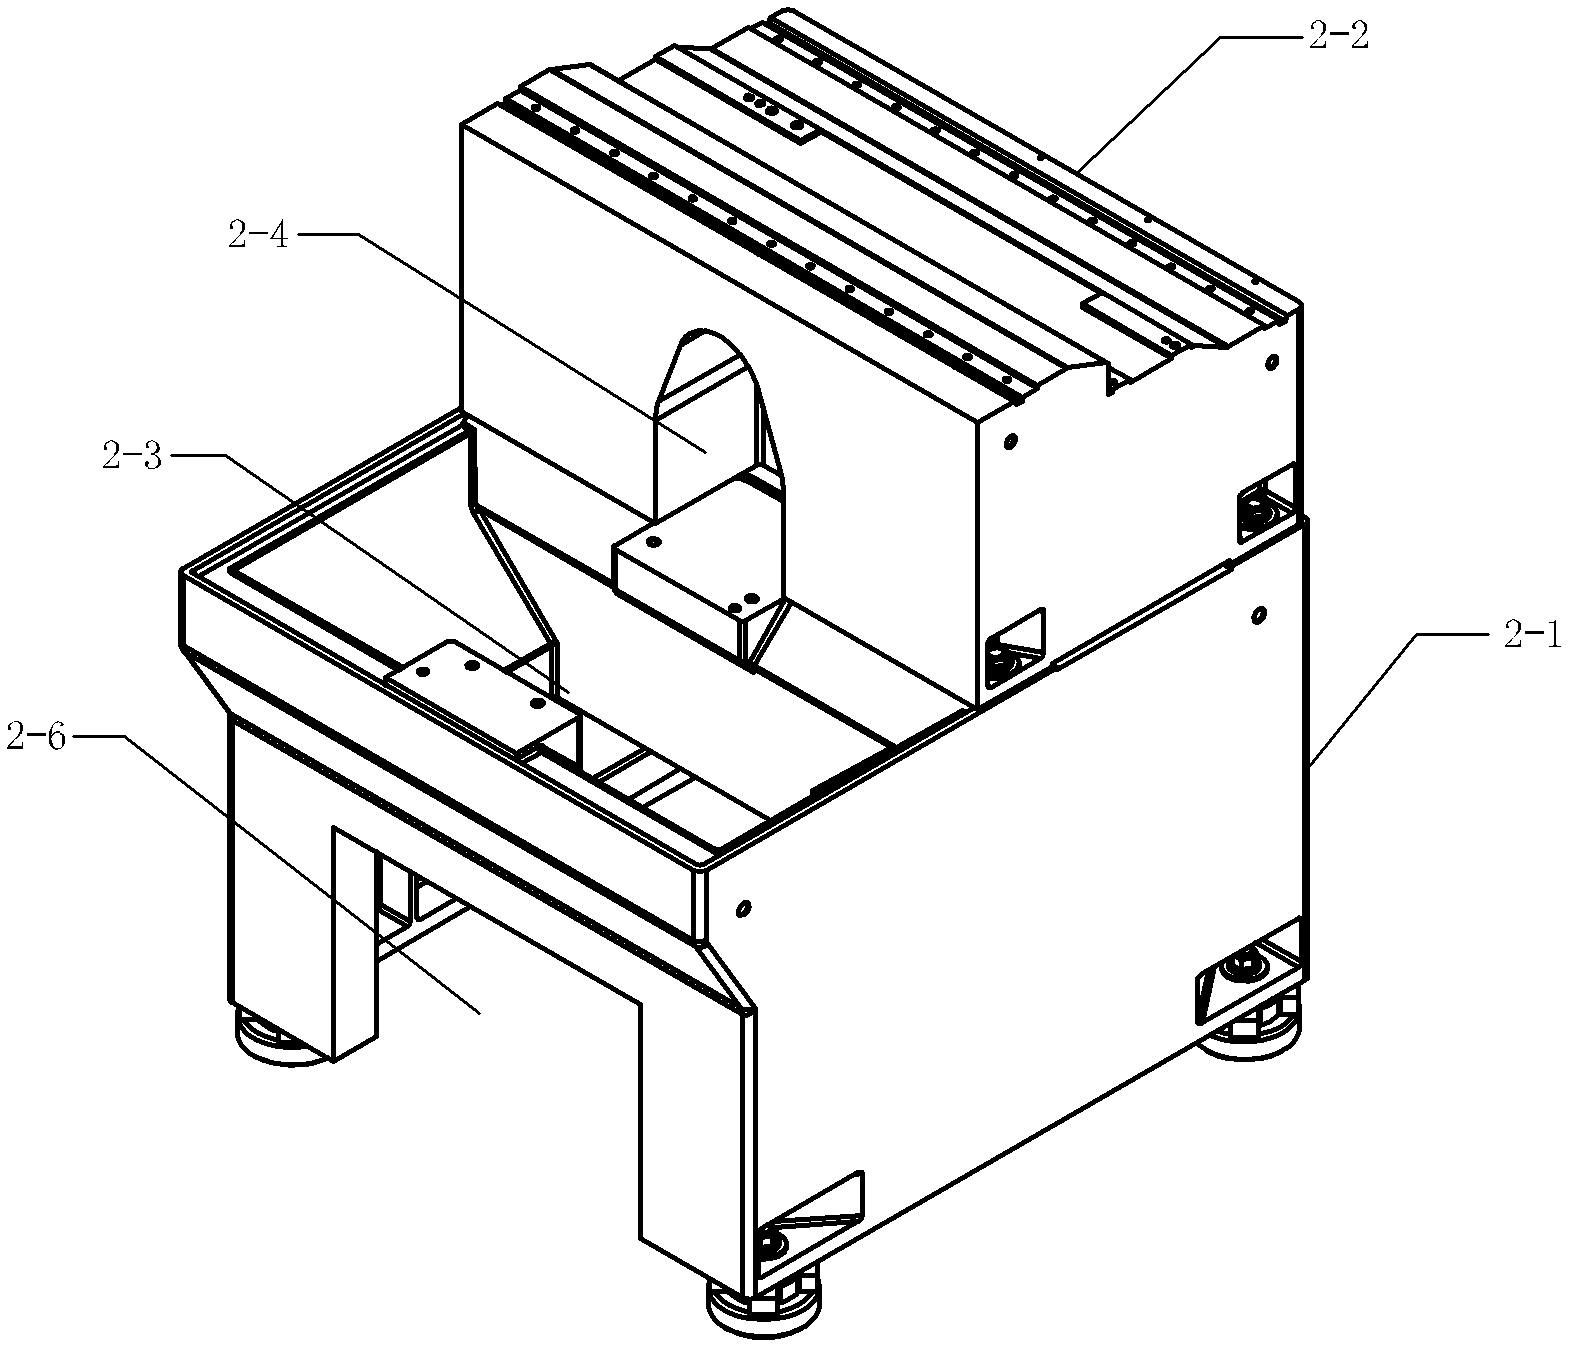 Combined structure of rotary table and base for small-size five-shaft machining device